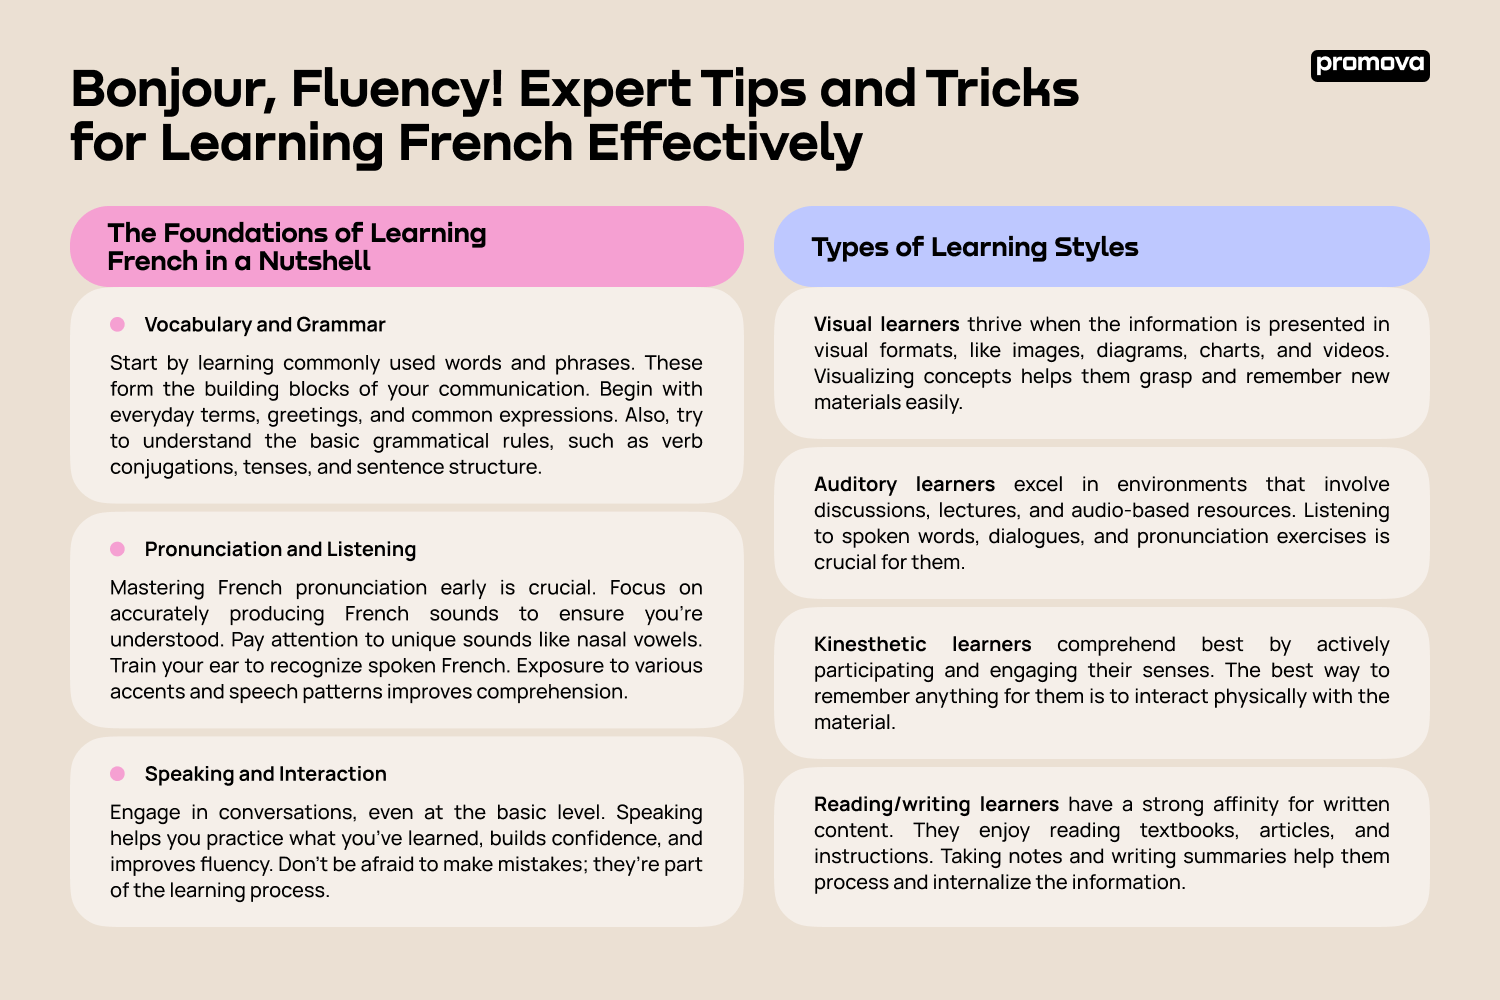 Discover Tips and Tricks for Learning French Effectively